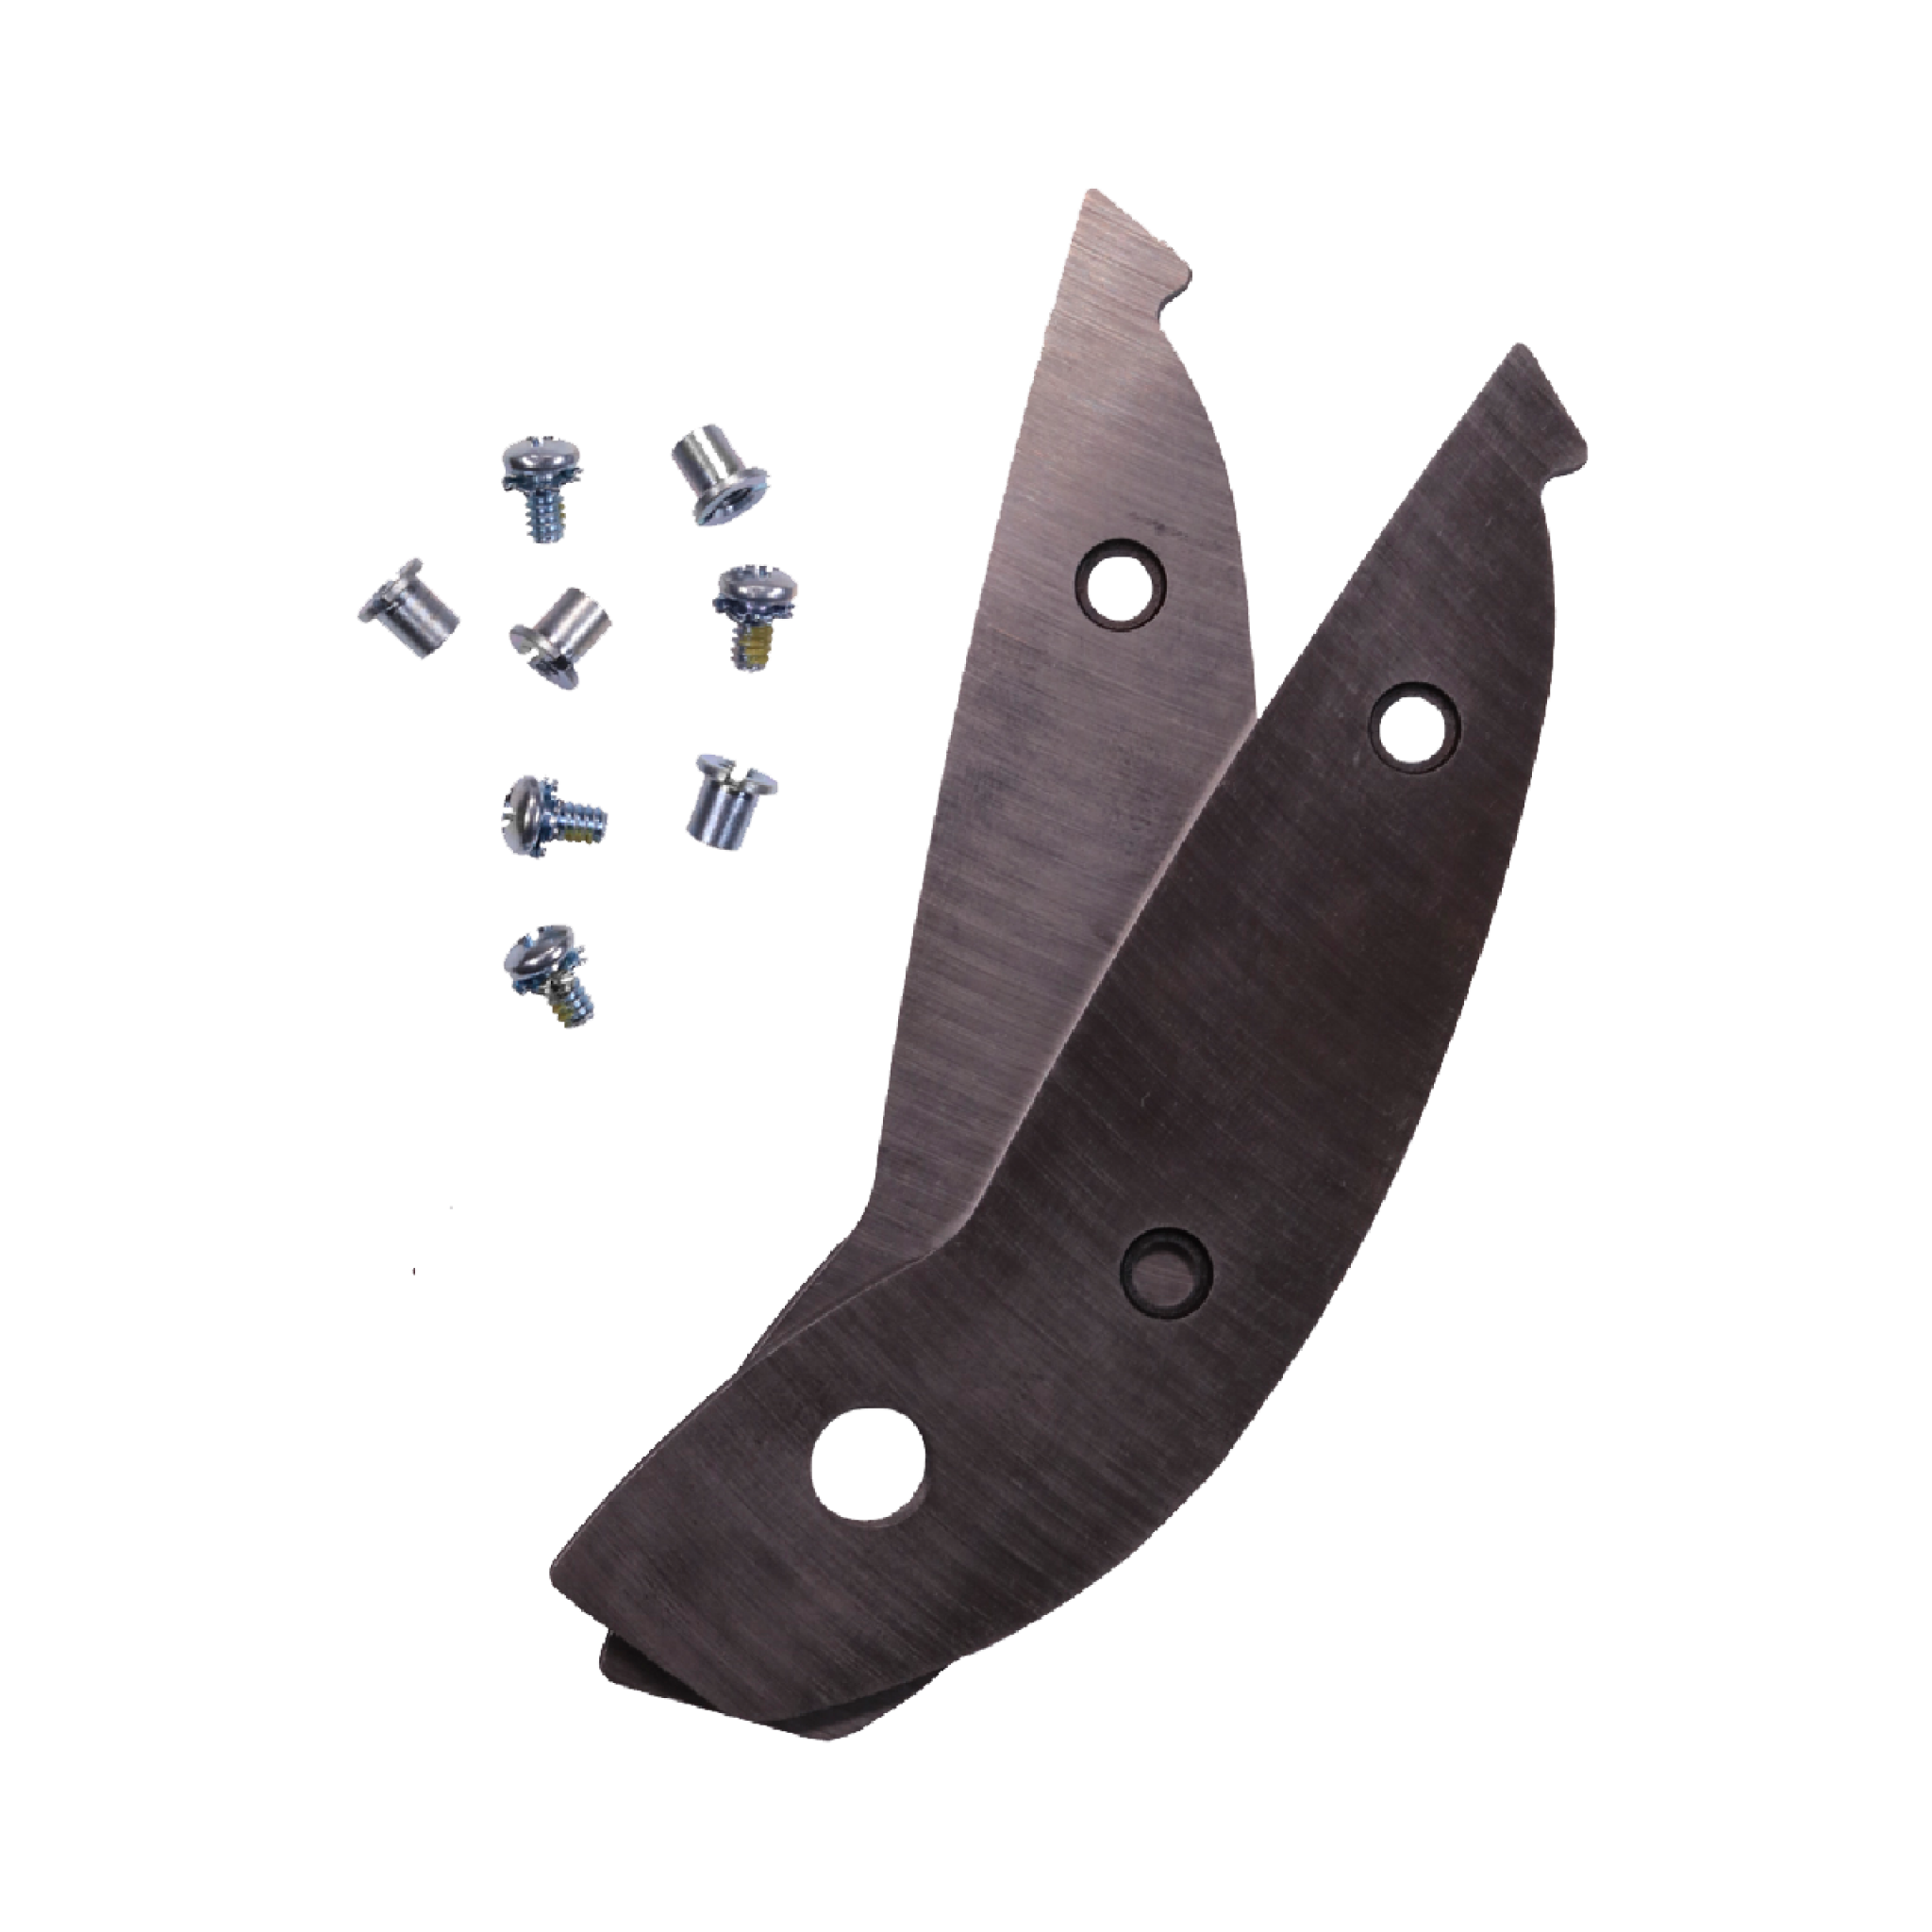 Andy Combination Snip Replacement Blades (M14RB)